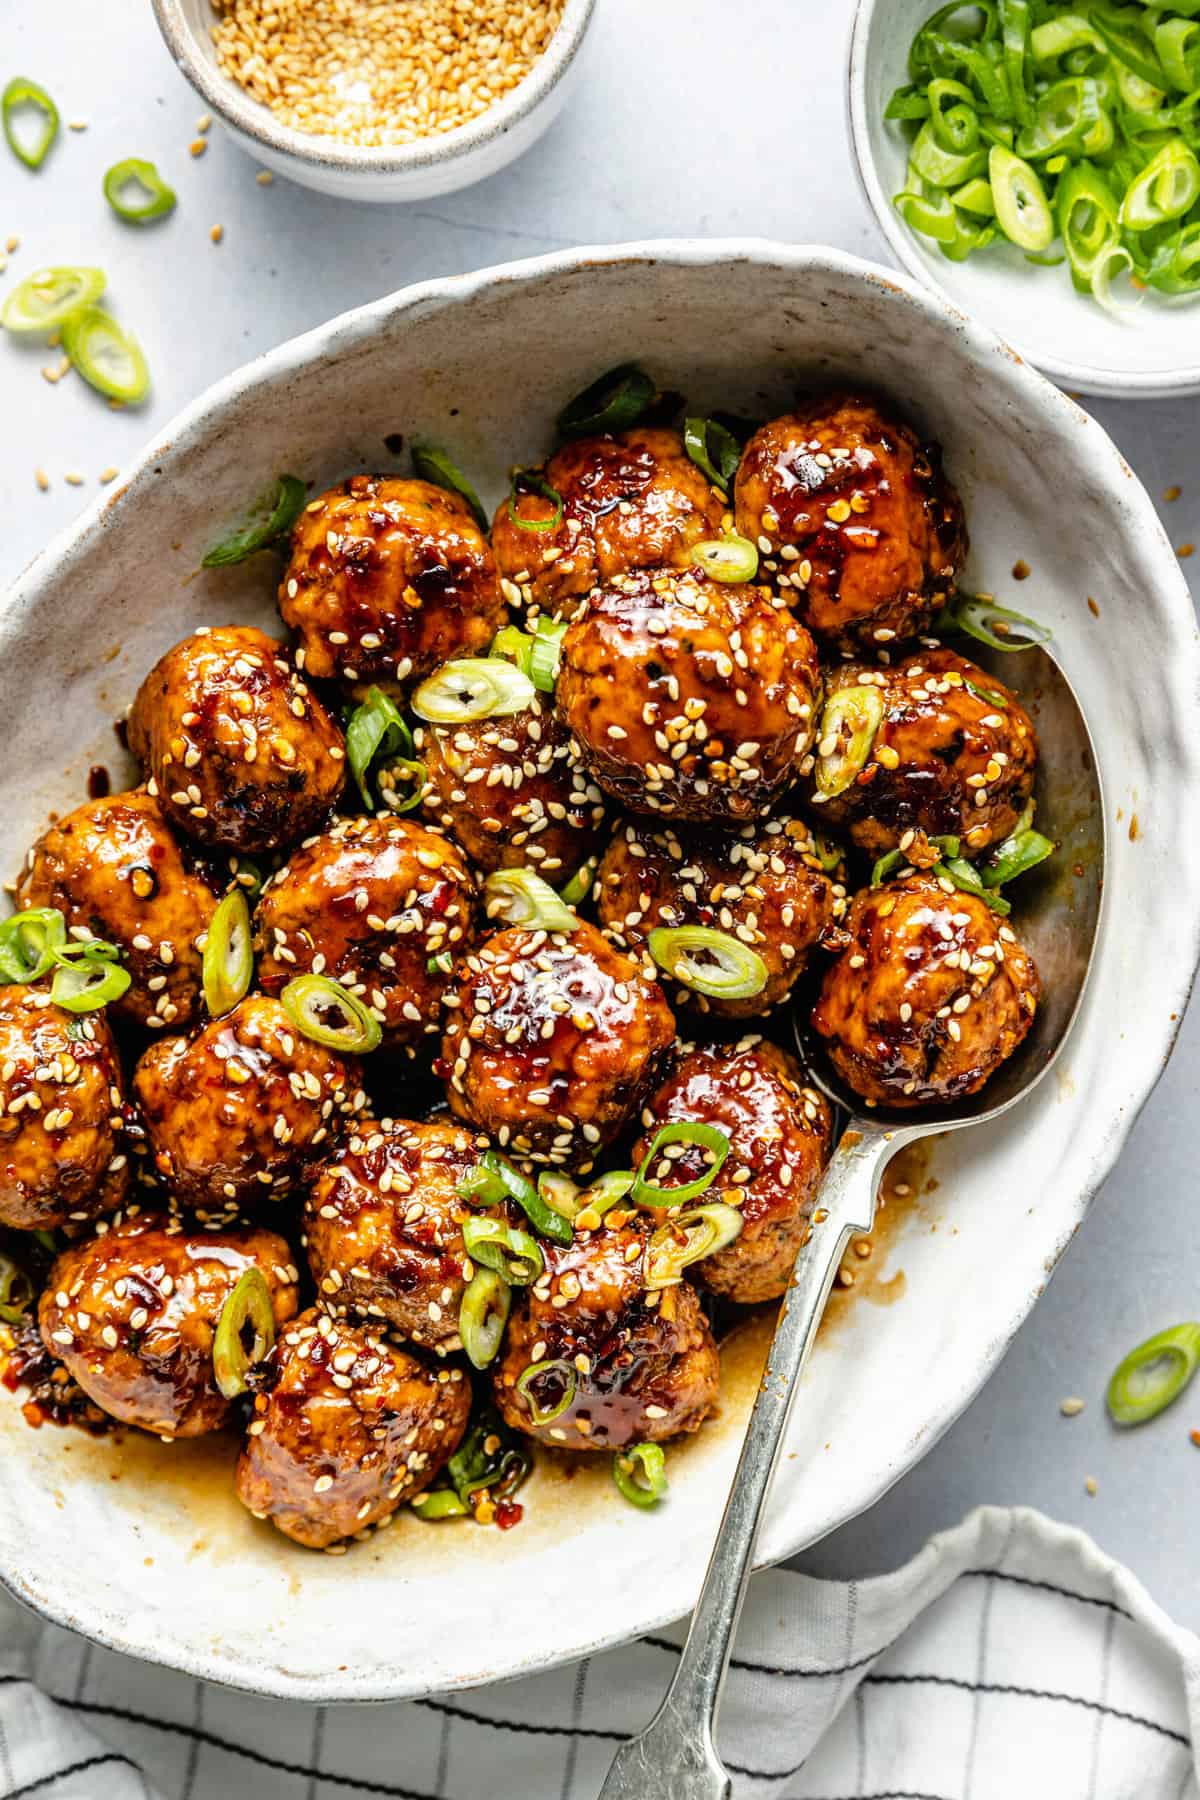 Healthy Sweet and Sticky Pork Meatballs in a white oval dish with a silver spoon - one of the recipes for this week's healthy weekly meal plan